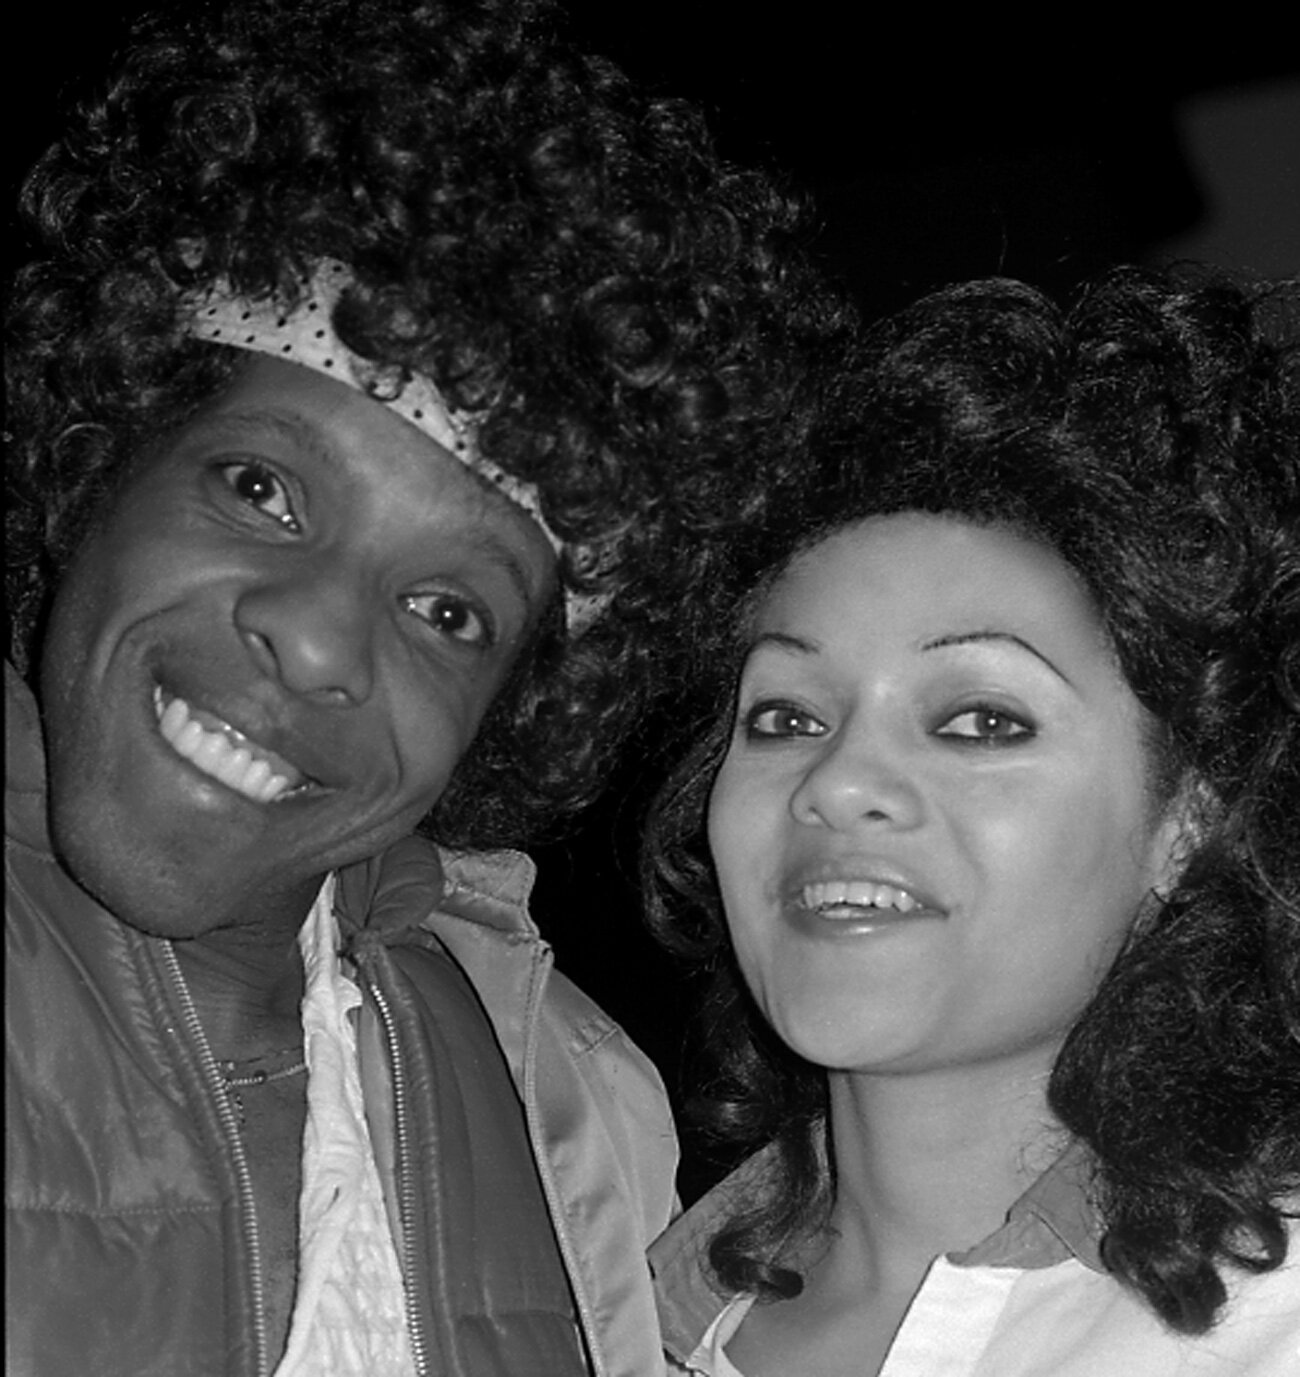 SLY STONE and FRIEND